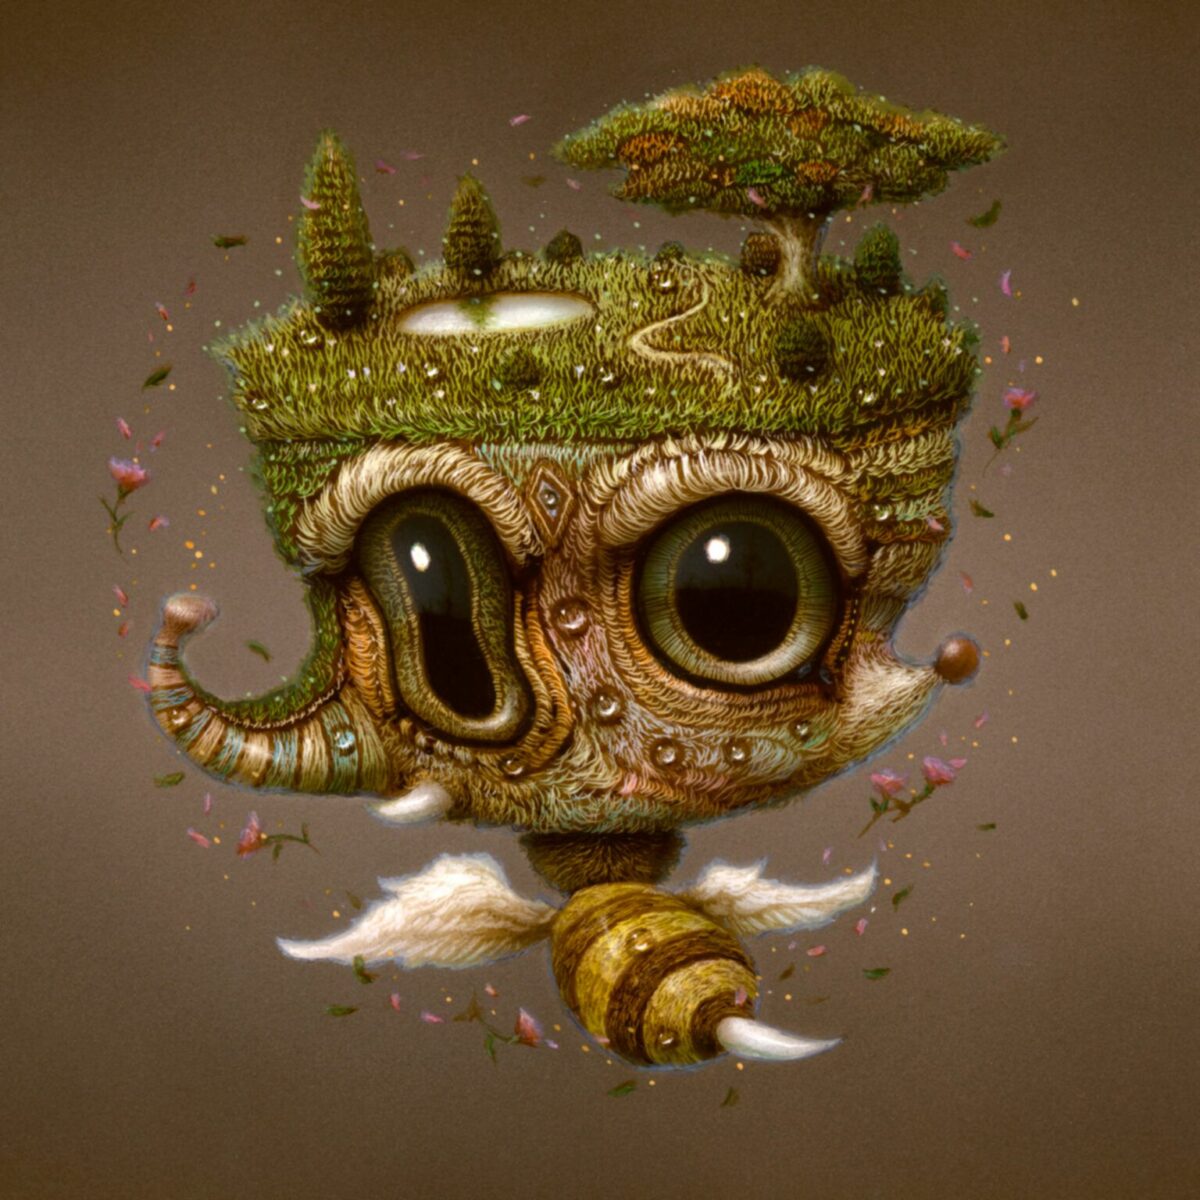 Quirky Fantastical Creatures With Oversized Eyes By Haoto Nattori 8